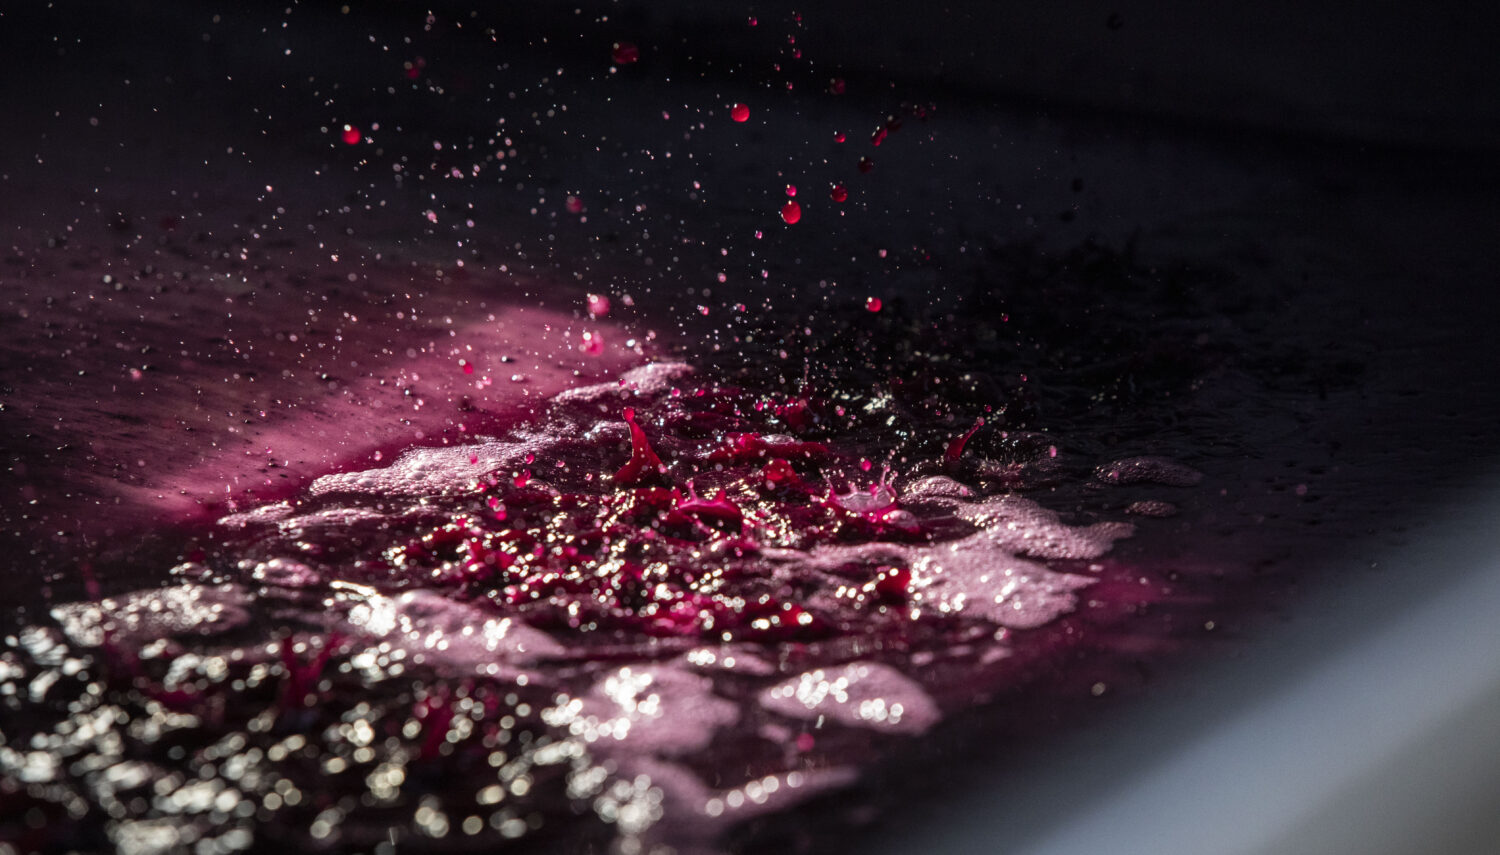 Light hit drops of fuchsia purple grape juice fall into a pool of juice surrounded by shadows.